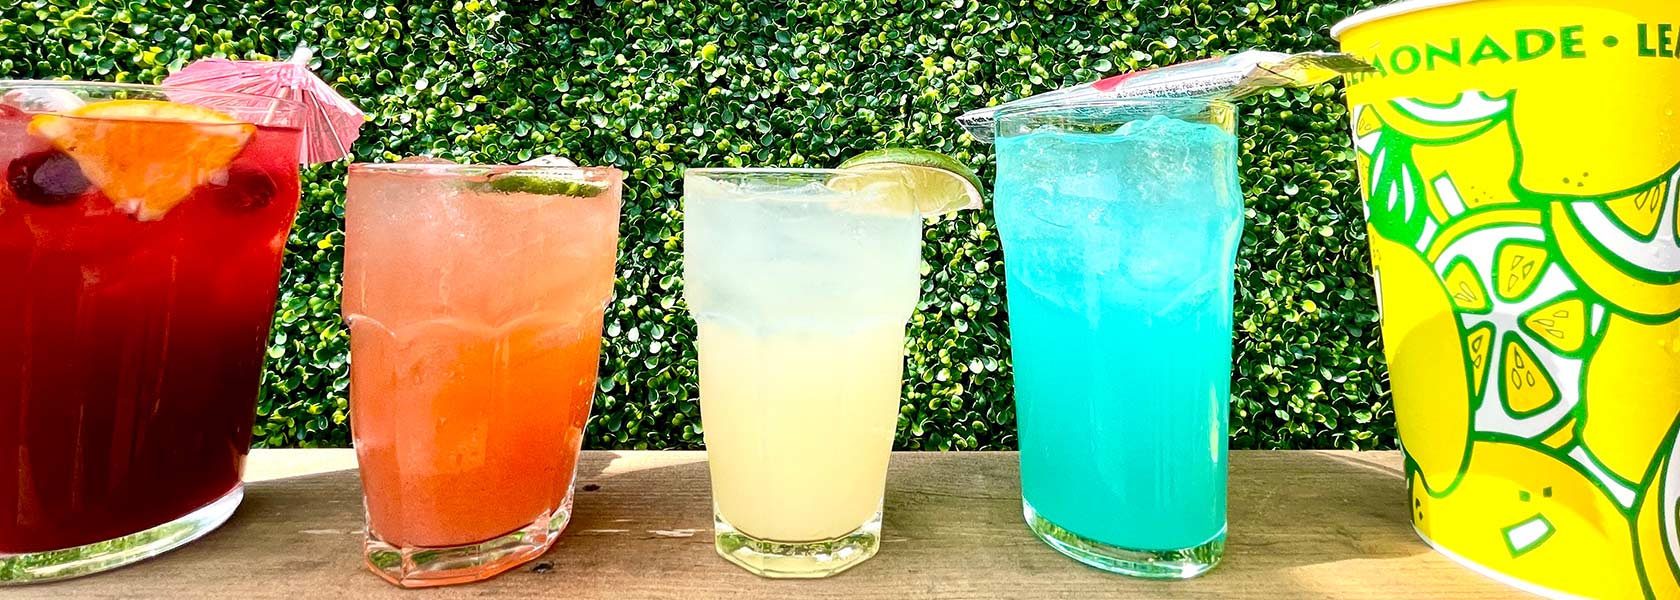 Array of colorful beverages on a shelf in front of a hedge